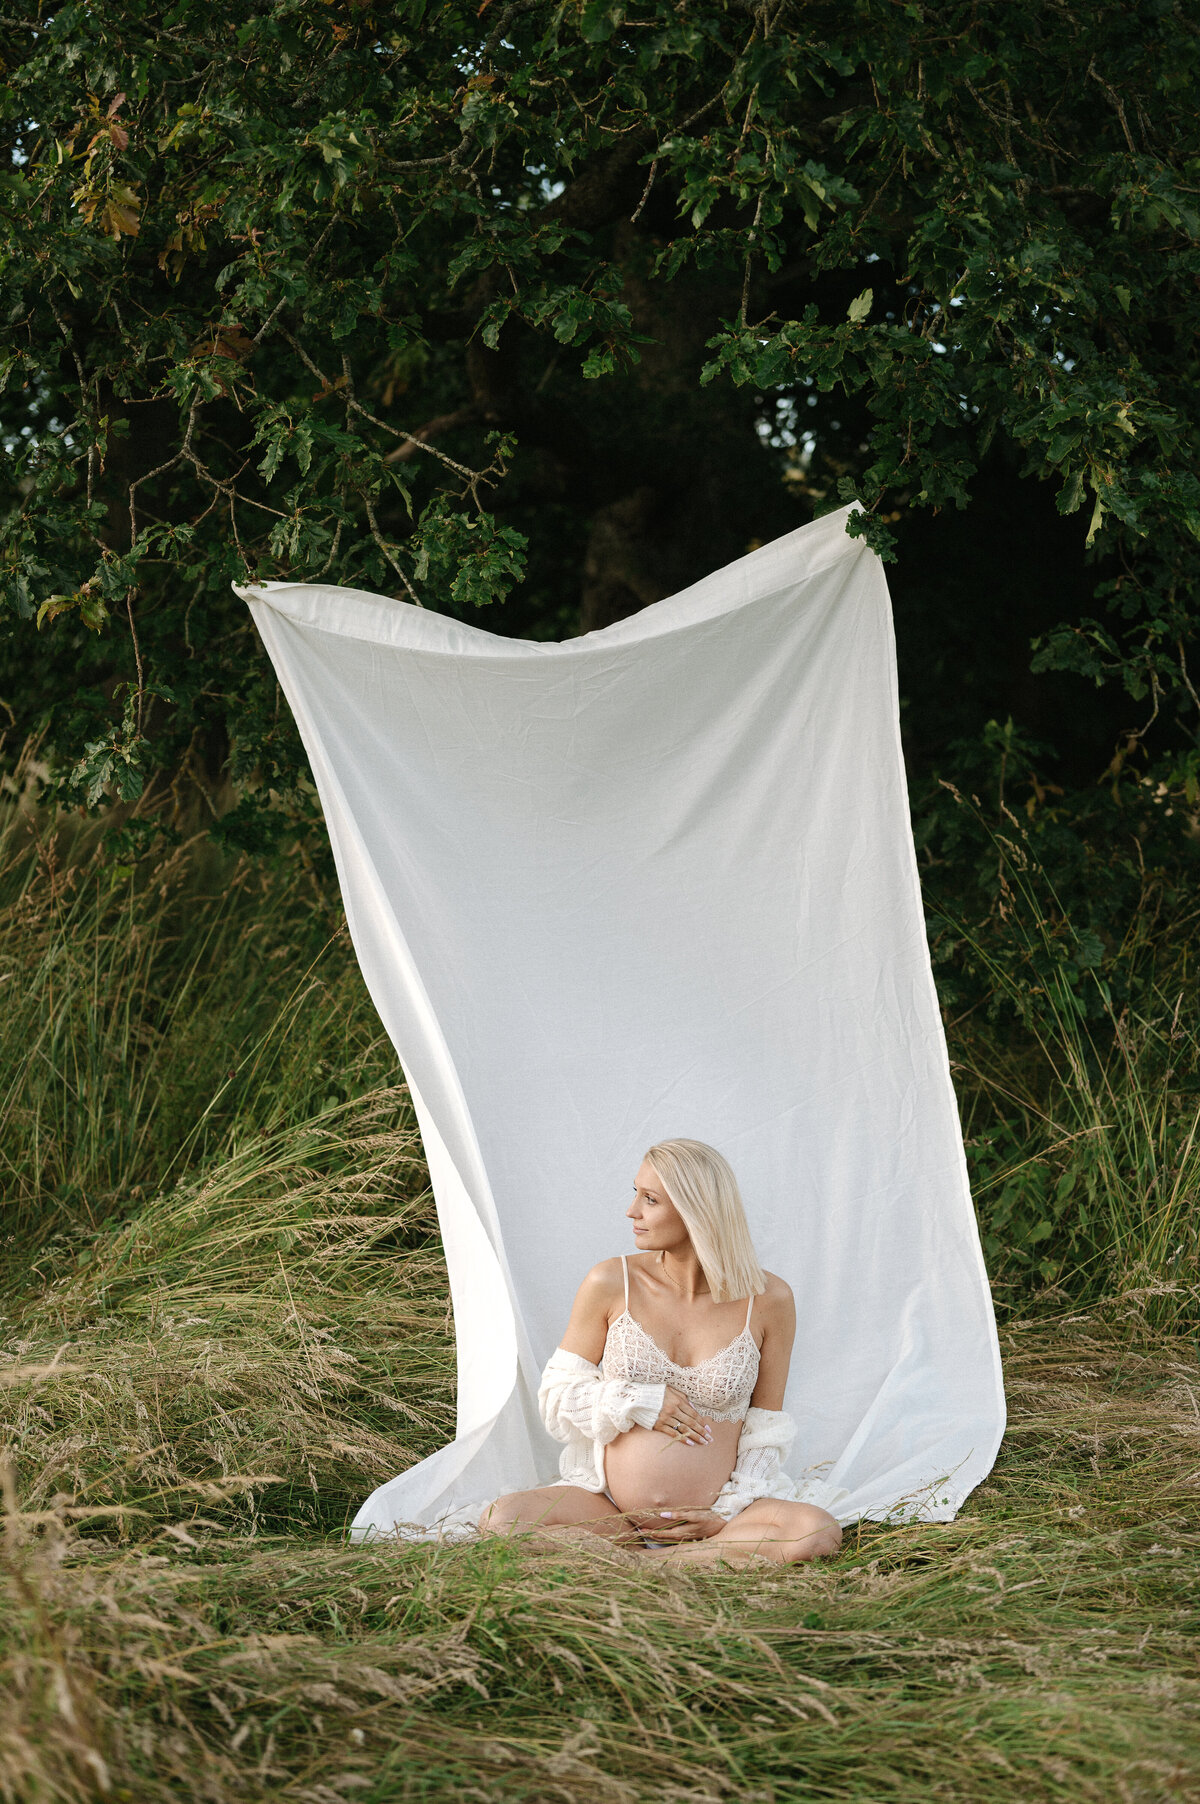 Outdoor pegnancy photography of a woman in a field in front of a white sheet